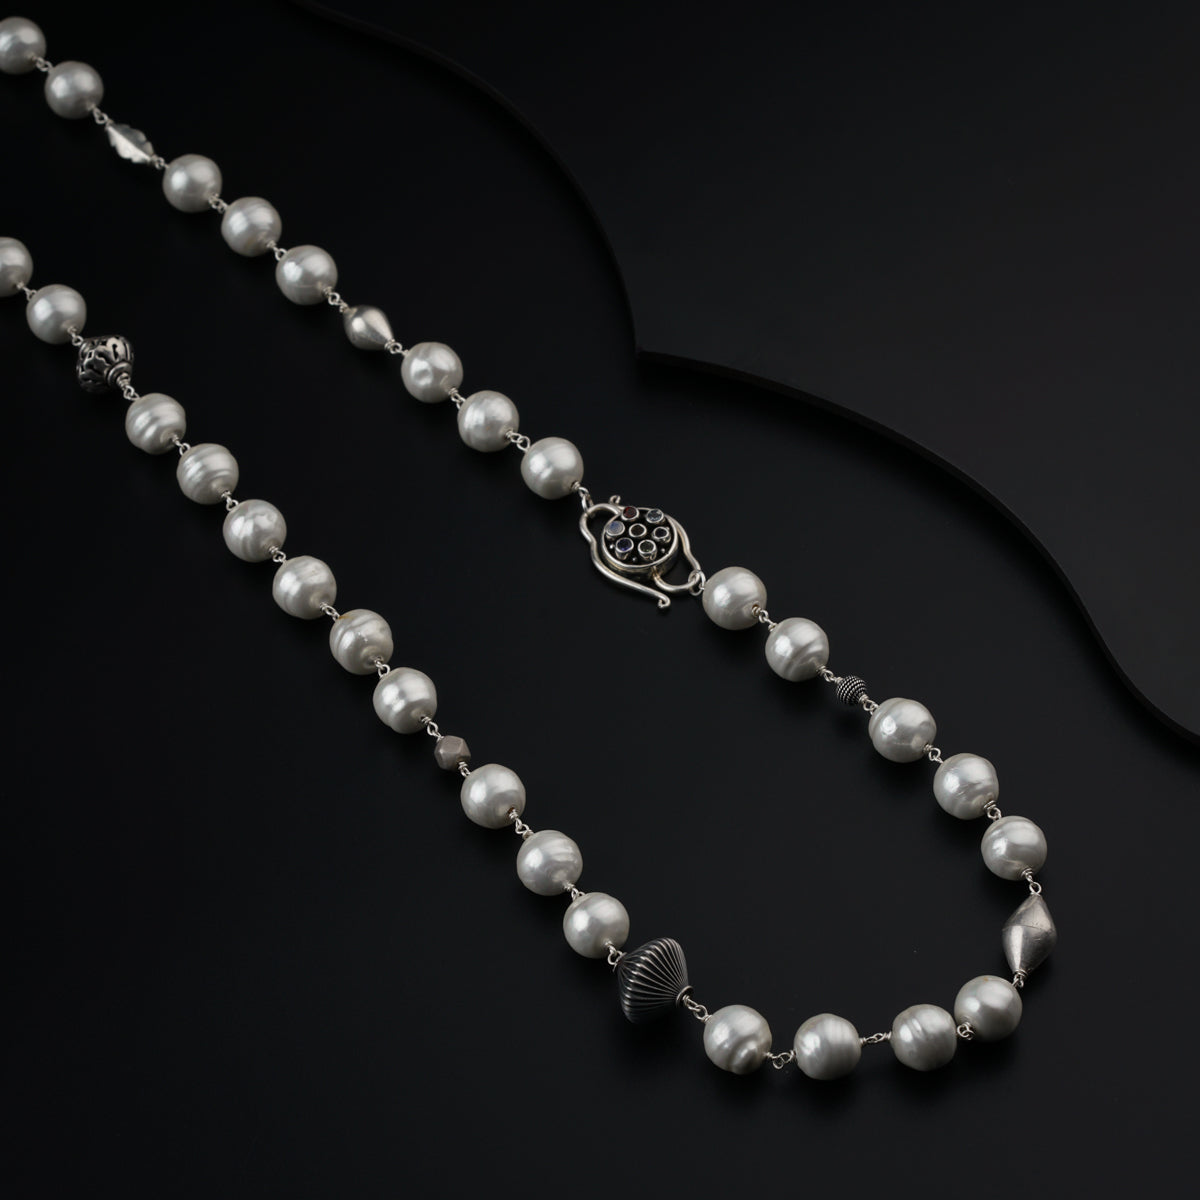 a long necklace with pearls on a black background